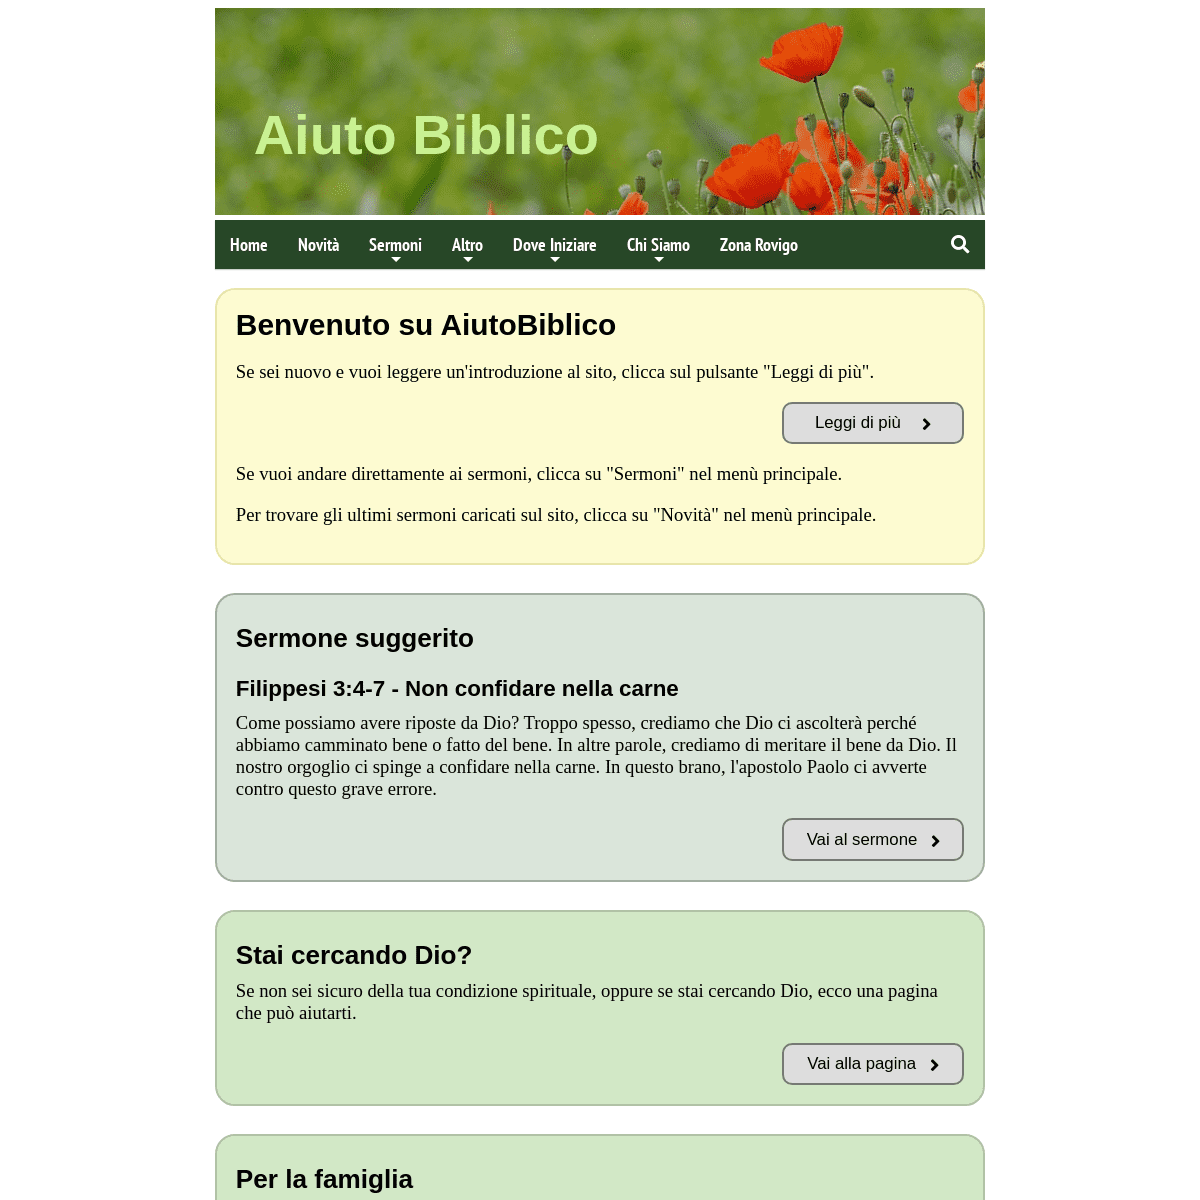 A complete backup of aiutobiblico.org